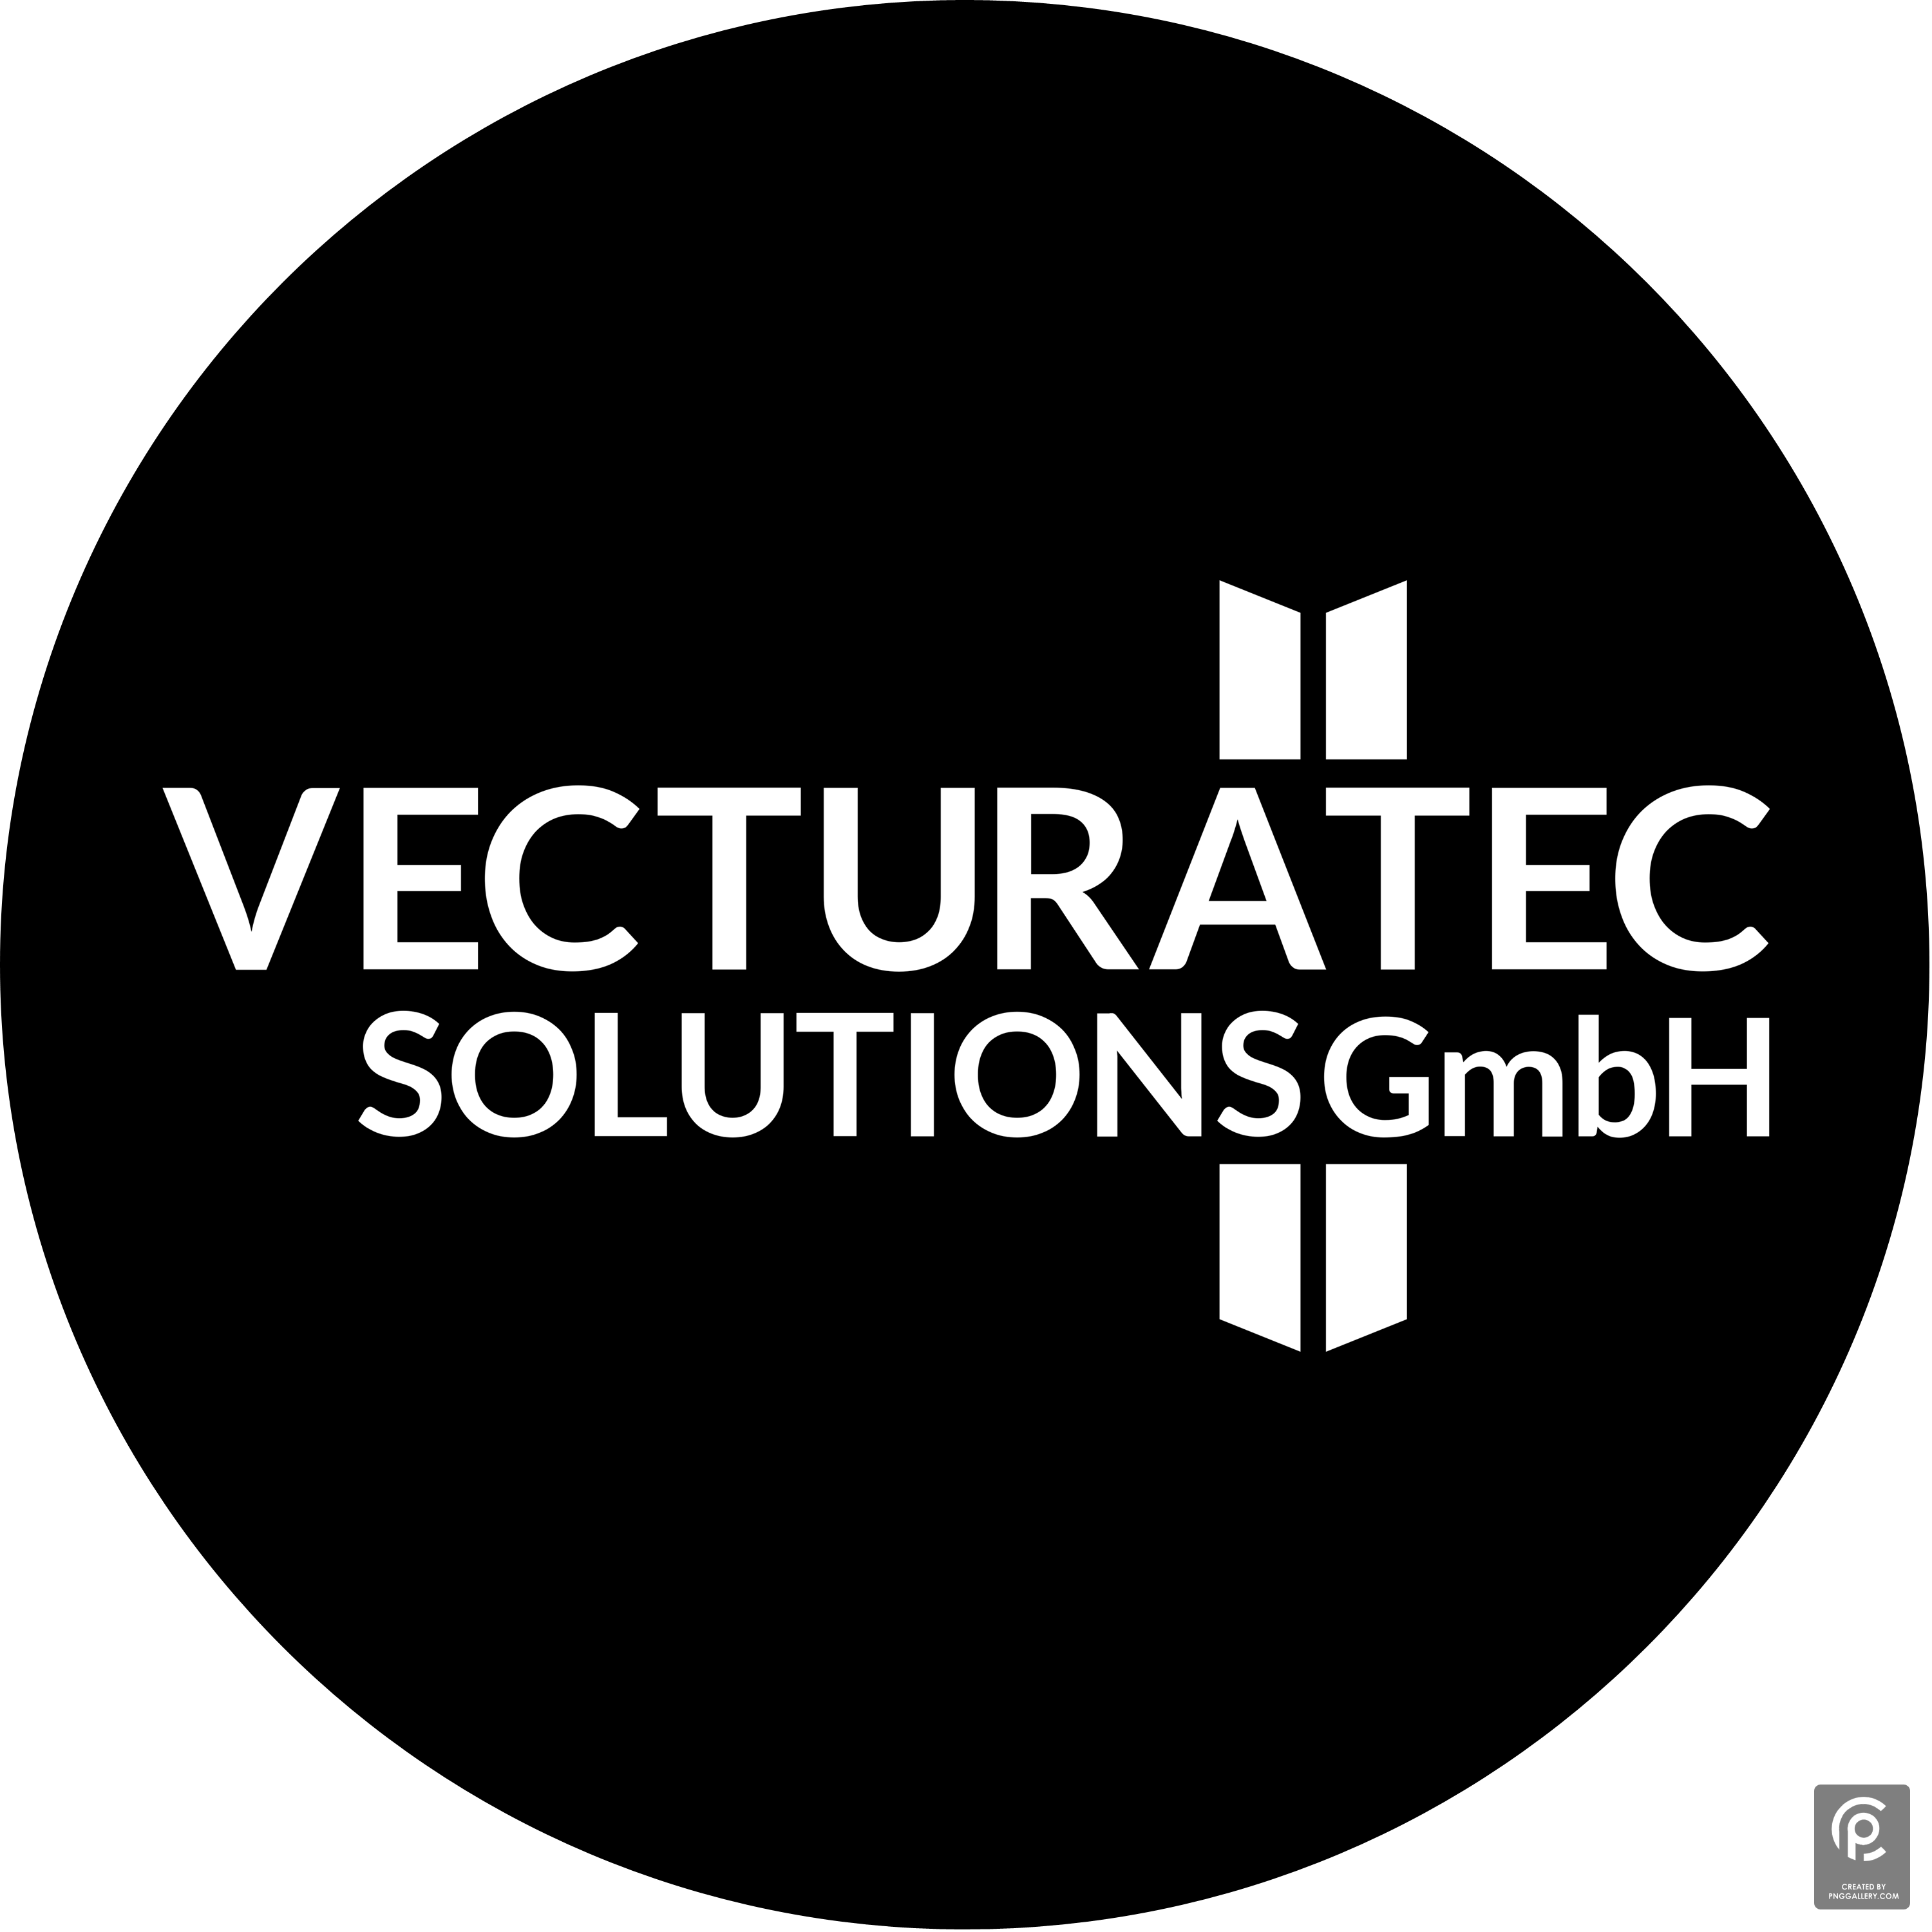 Vecturatech Solutions Logo Transparent Gallery